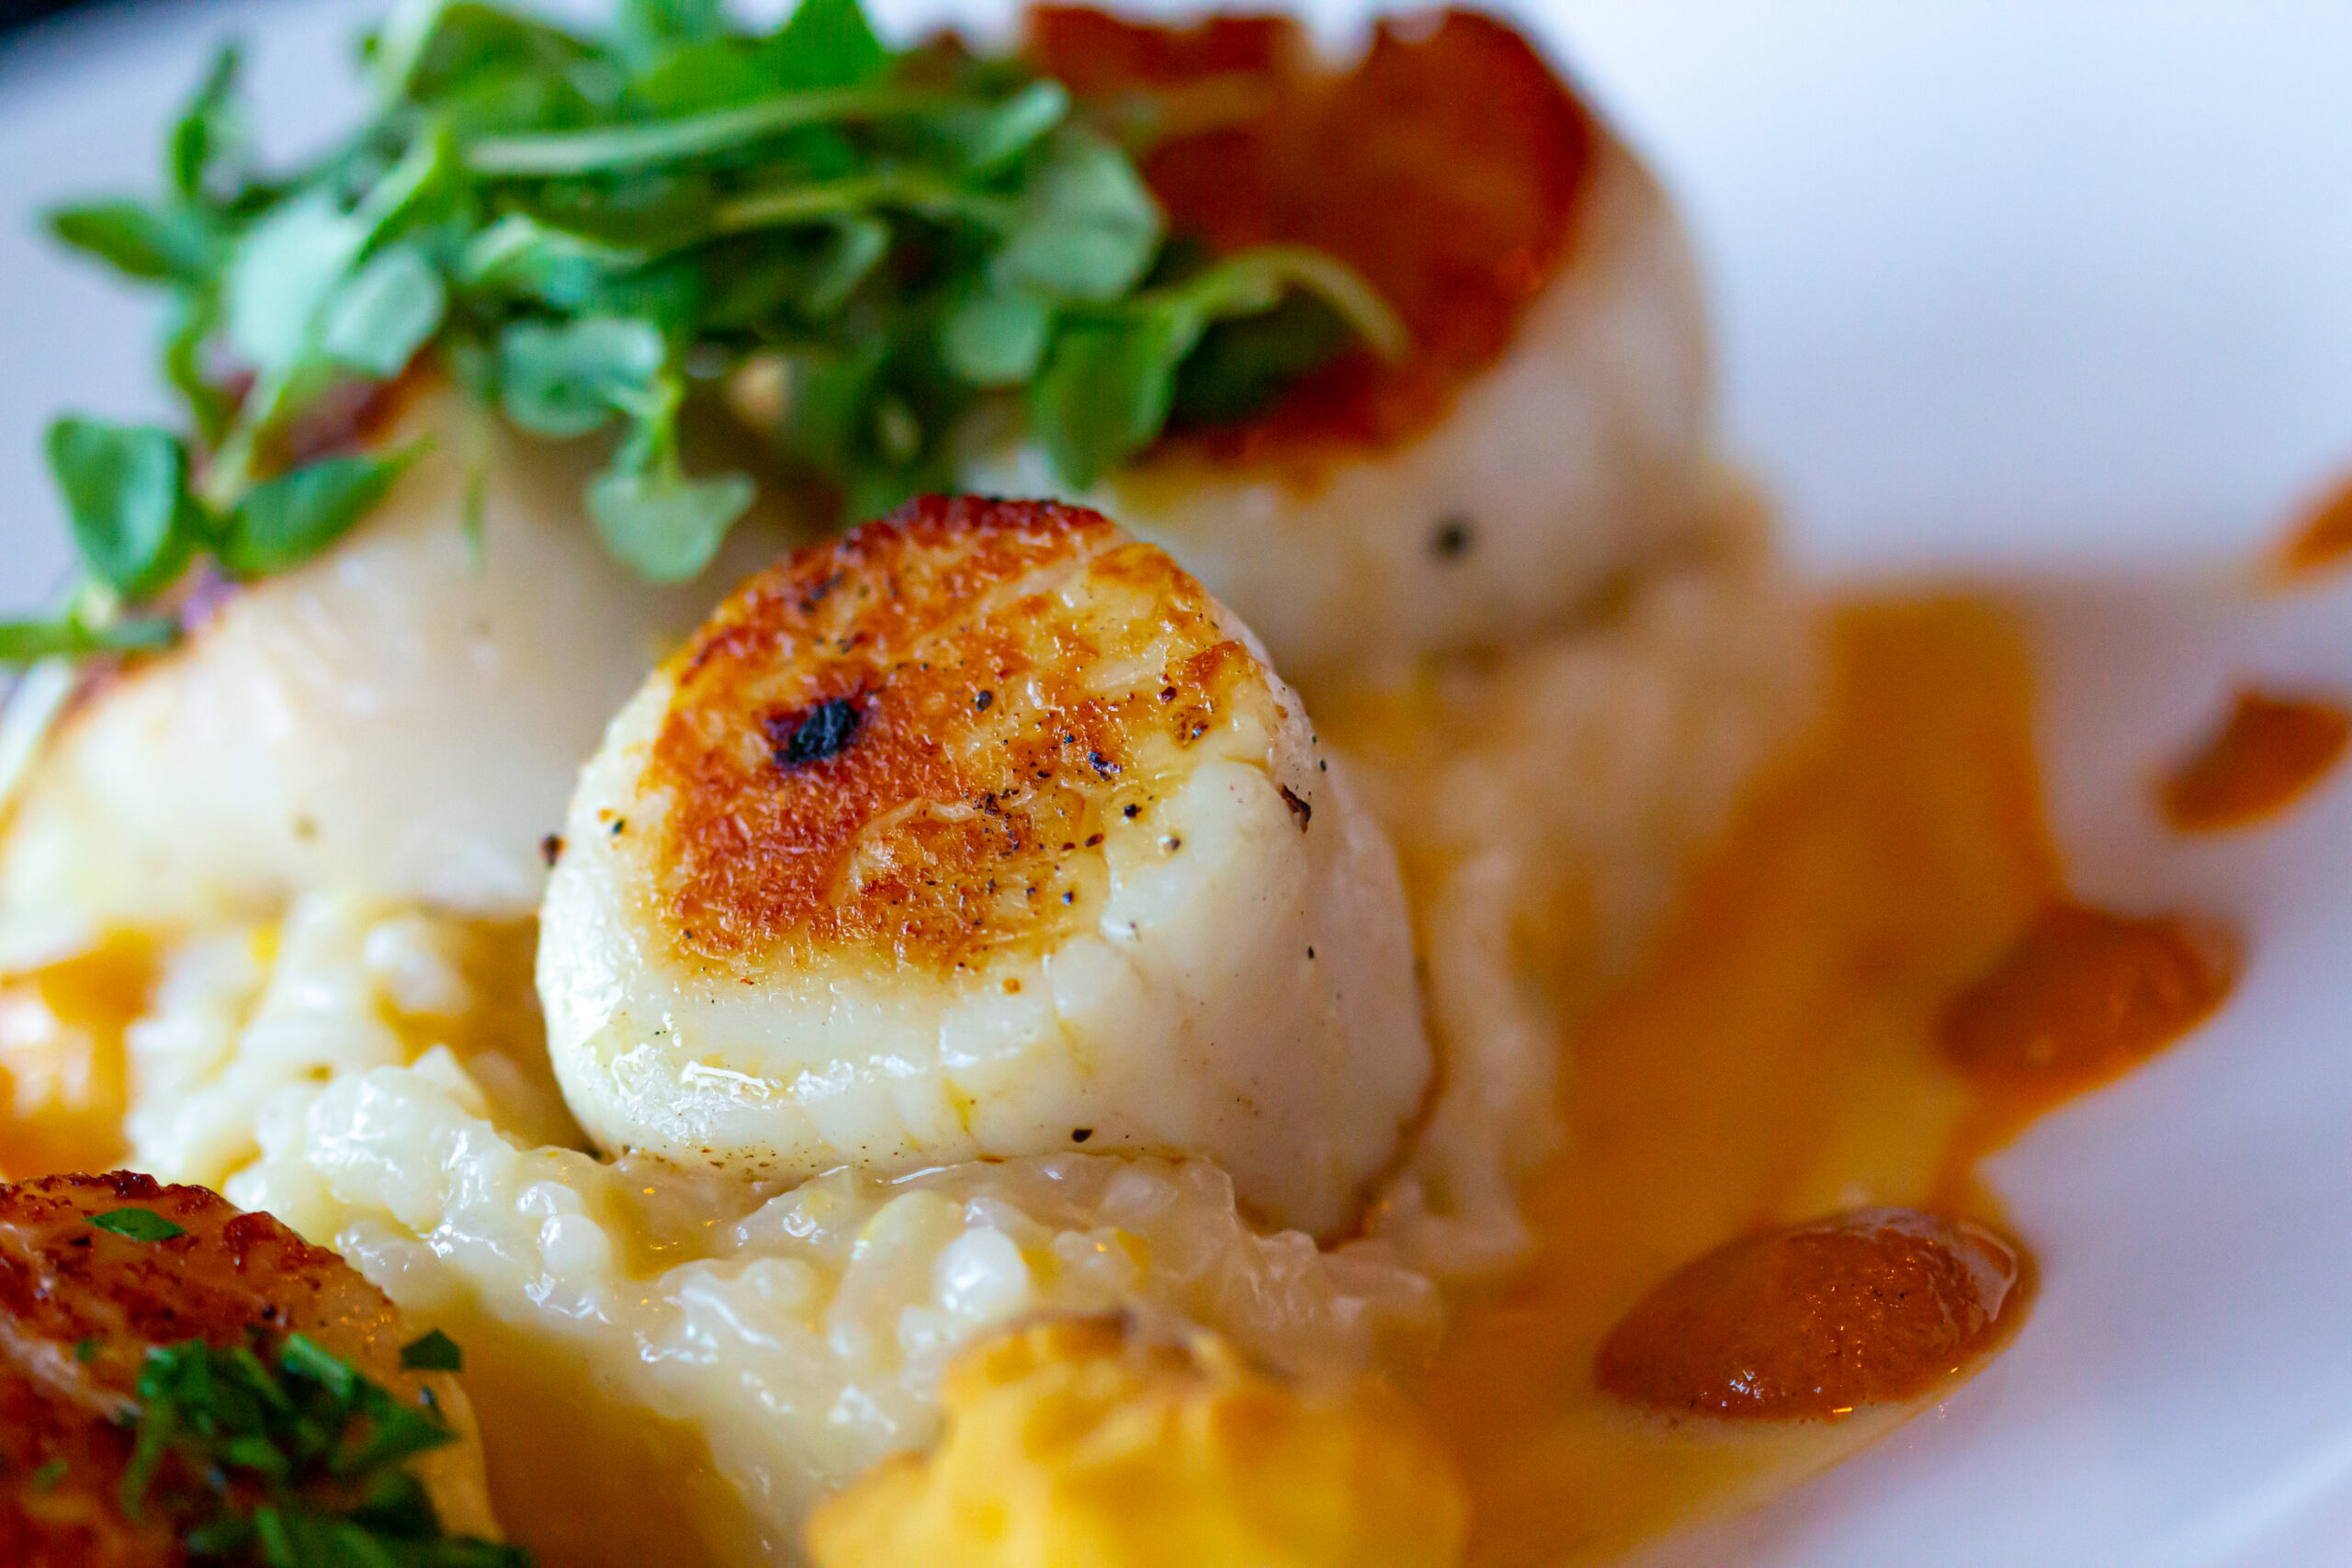 scallop with reduction sauce